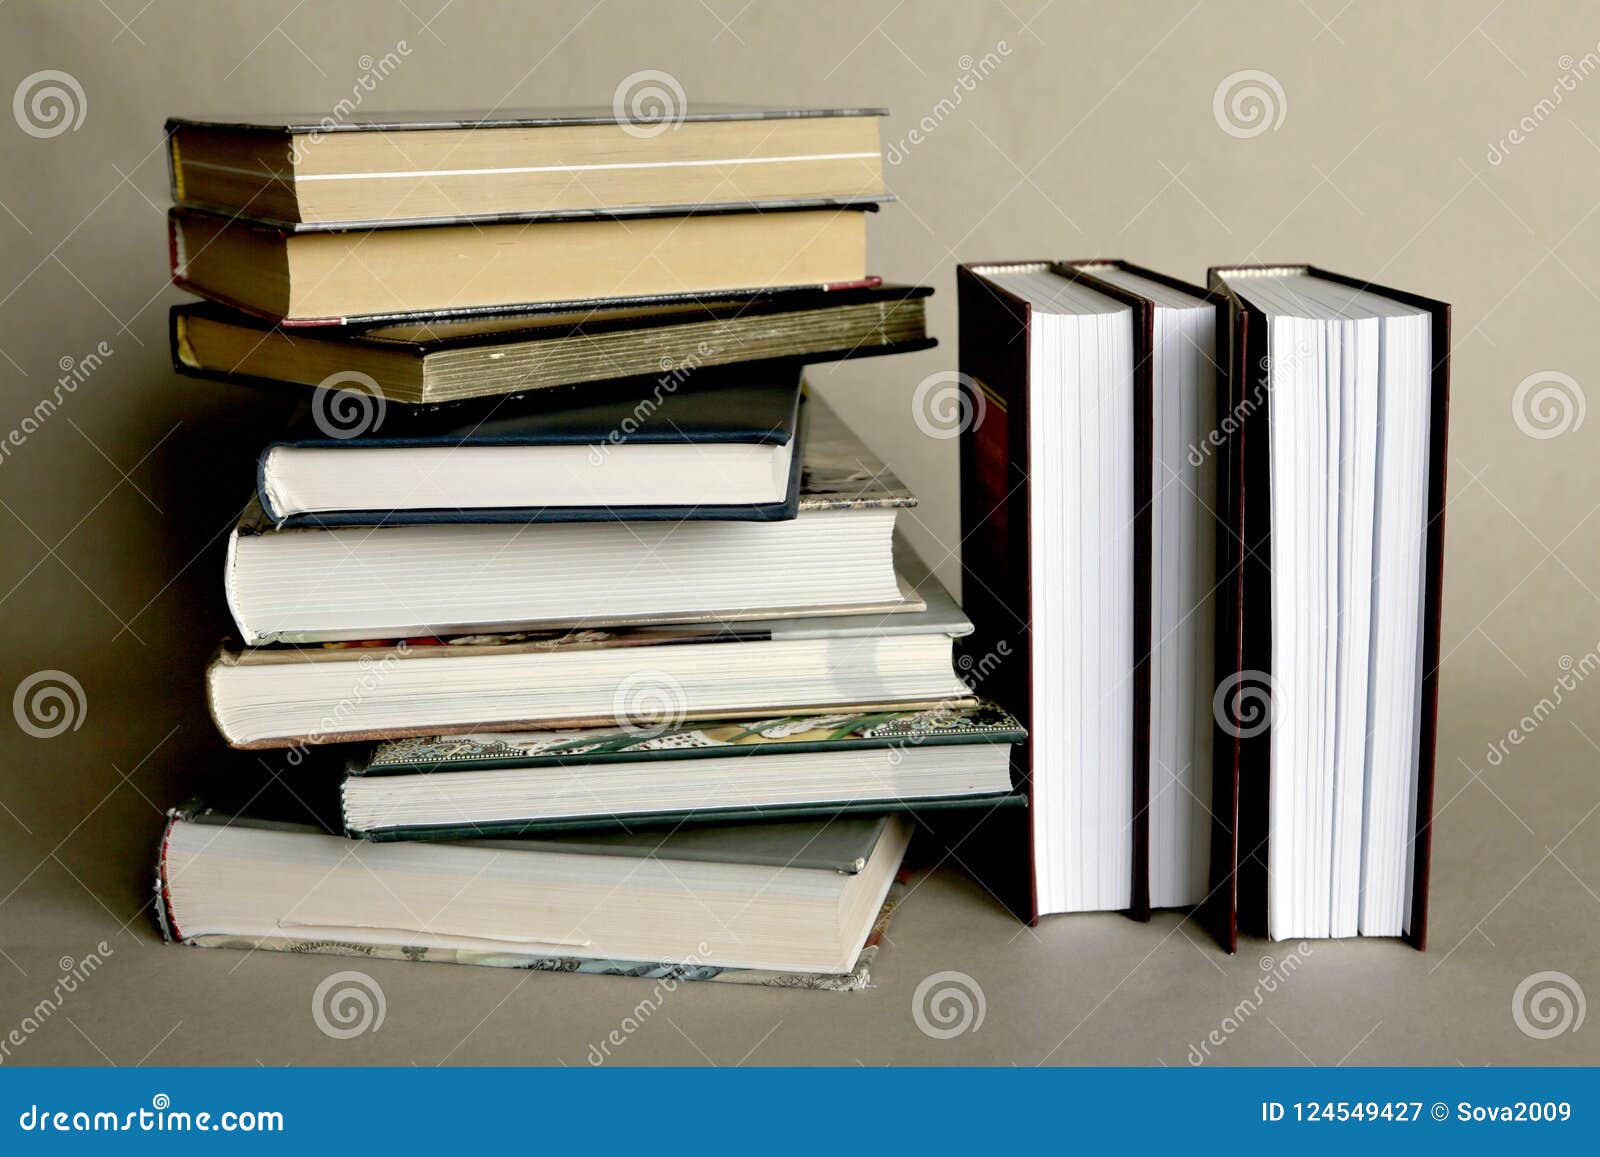 Stack of Books in the Workplace Stock Image - Image of library